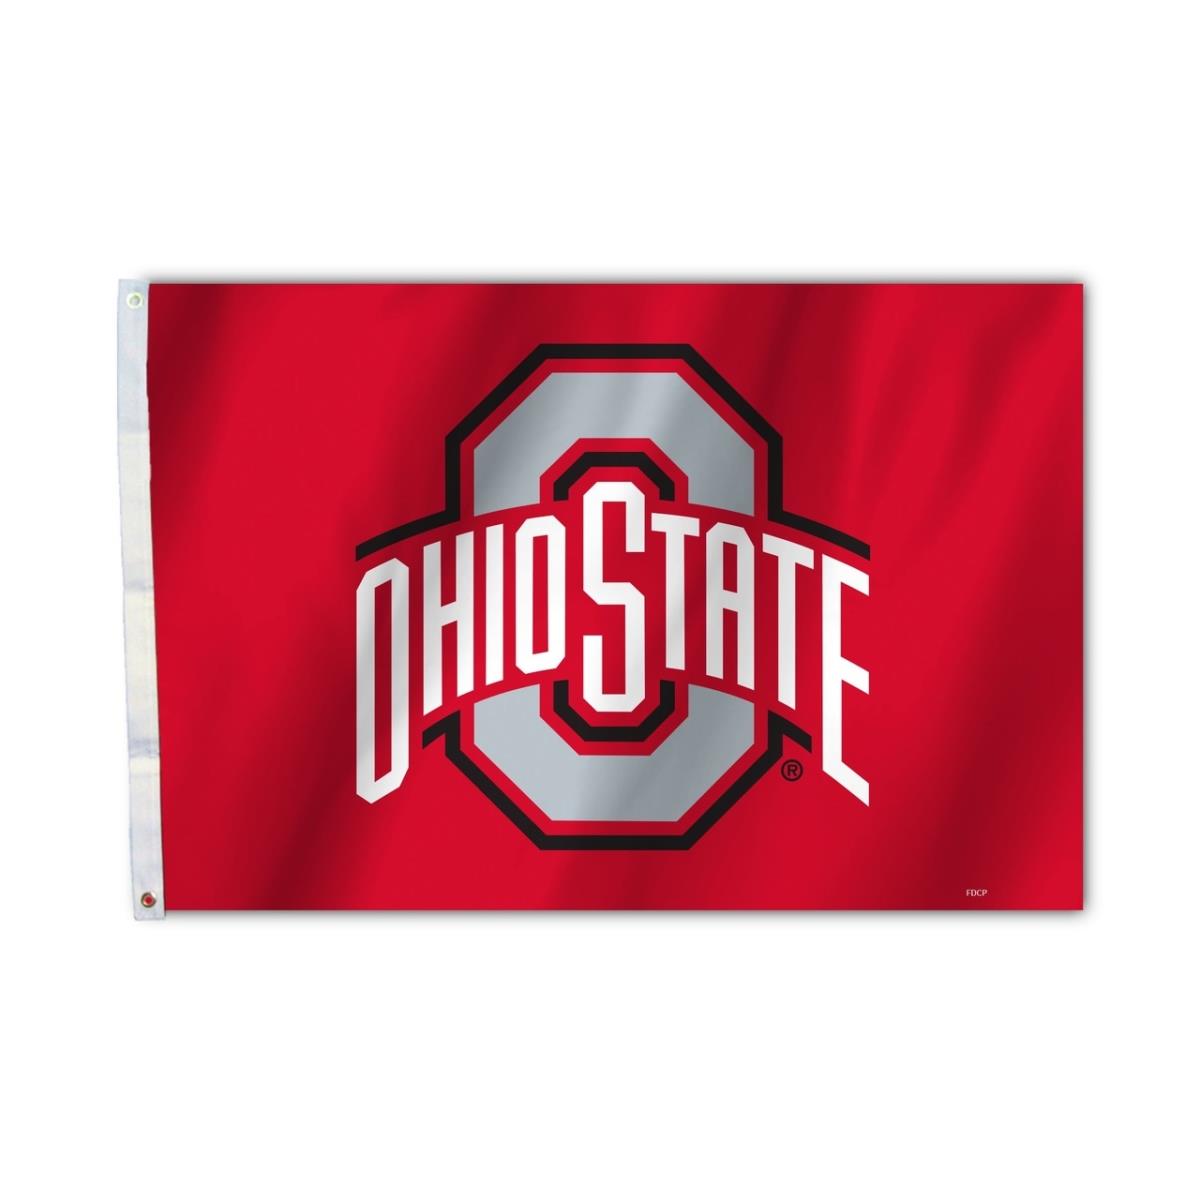 Picture of Fremont Die 2324542098 2 x 3 ft. Ohio State Buckeyes Flag